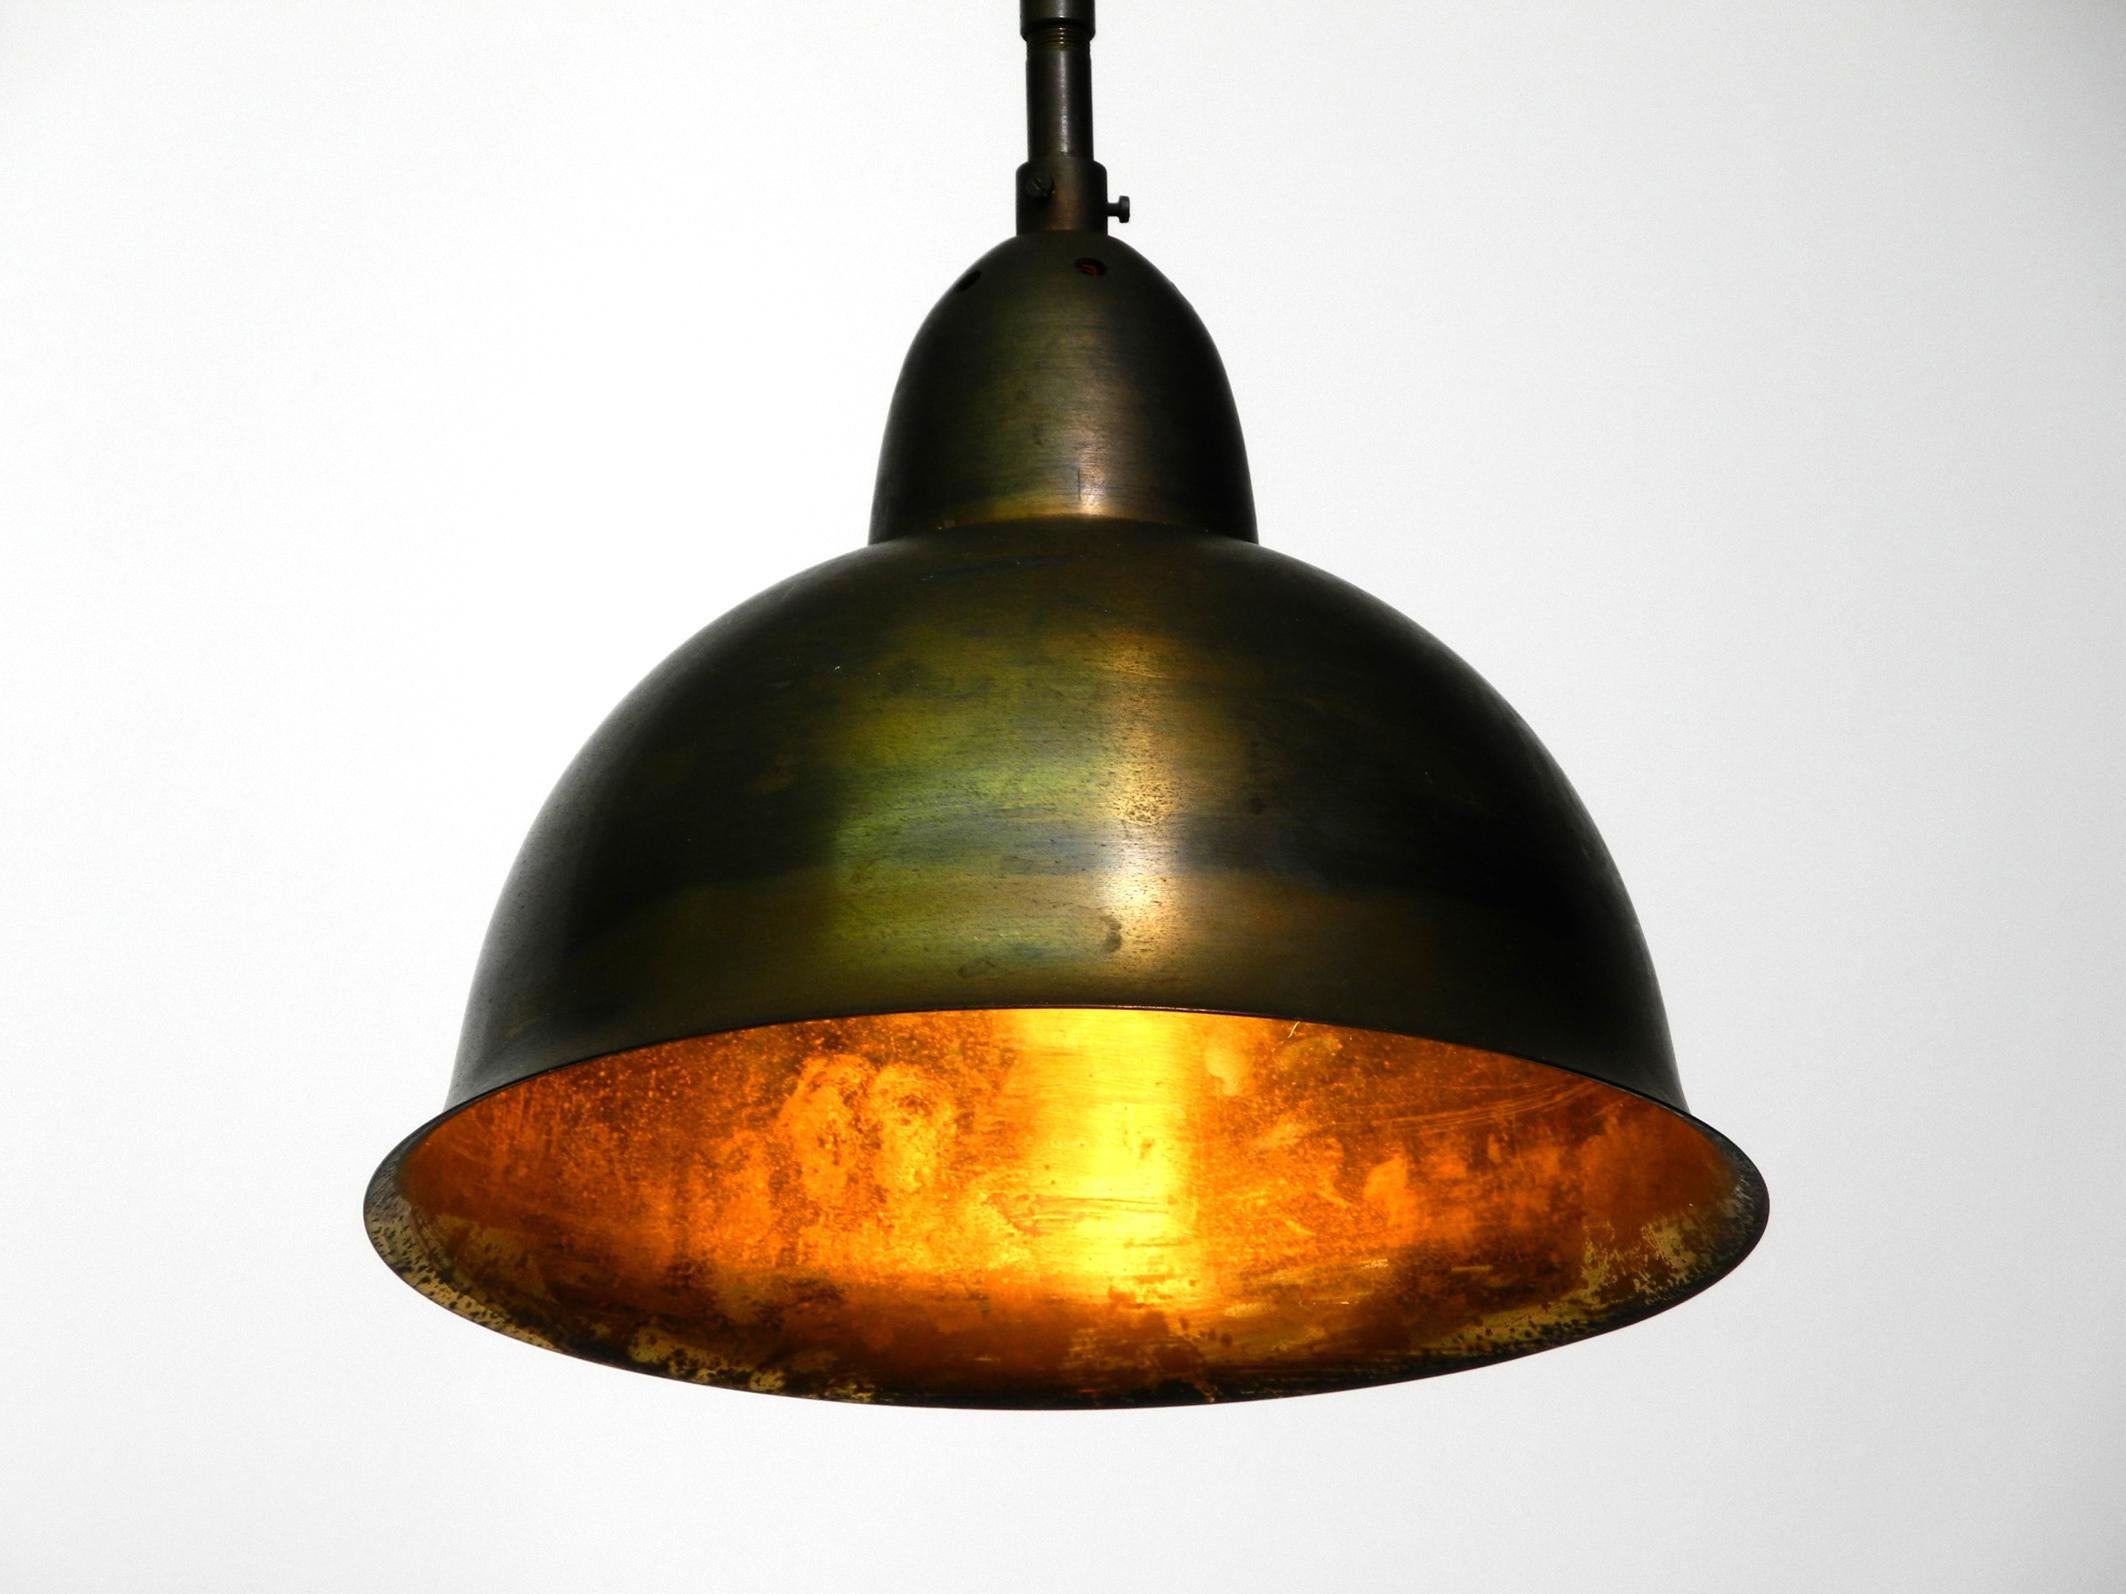 Beautiful original mid century brass pendant lamp.
This lamp hung in a German church for over half a century. Brass shade and socket.
100% original and fully functional.
One E27 socket for up to 60W.
Rewired due to age and with a new metal